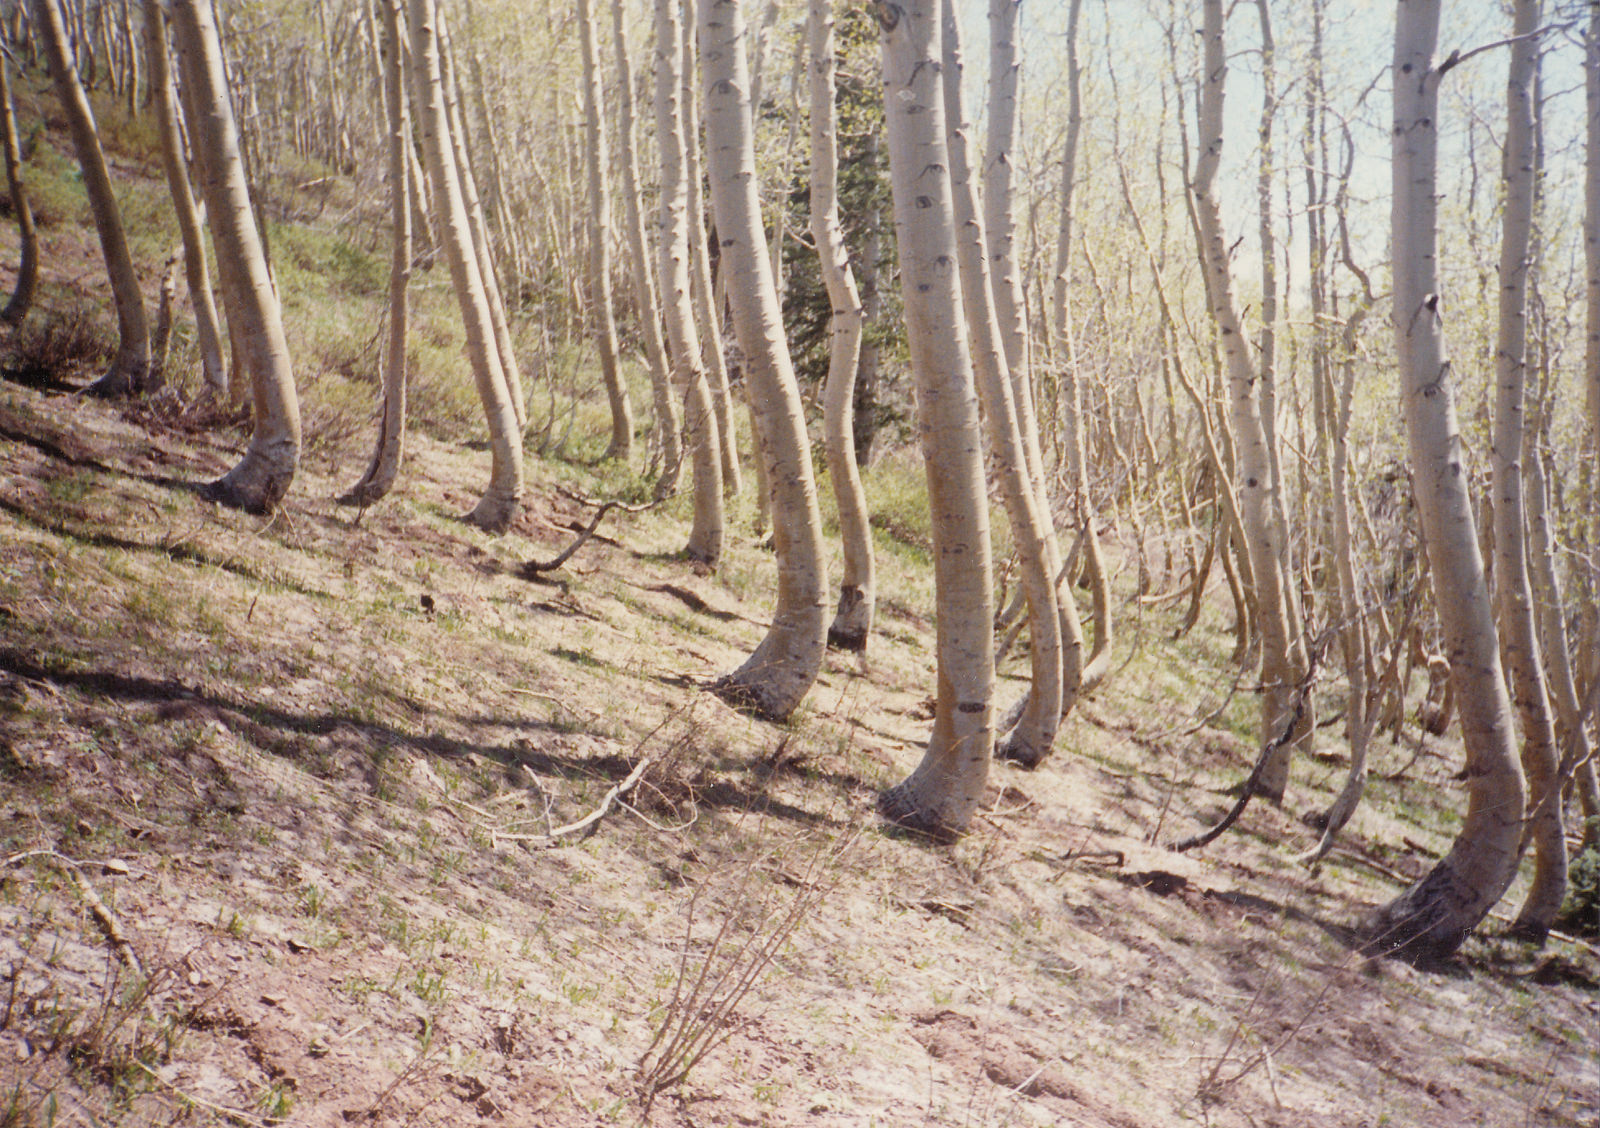 Trees on a slope. The trees are bent at the base. It appears the trees initially grew and then the ground shifted.